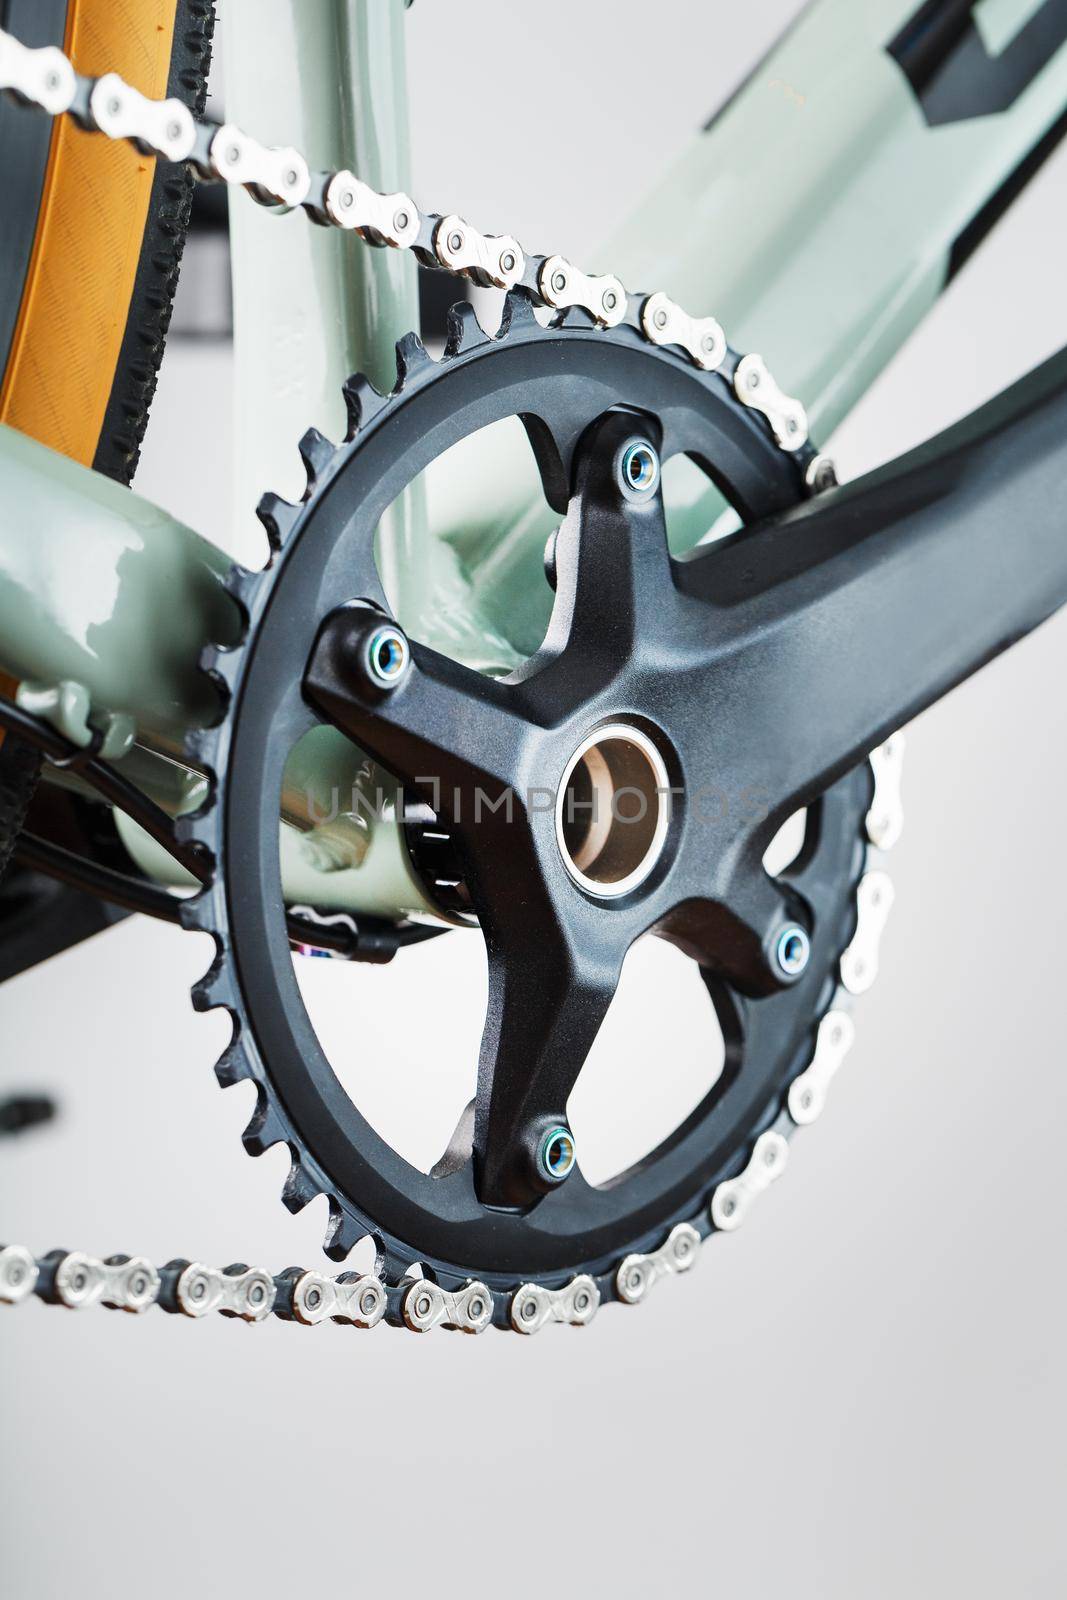 Bicycle crank system with chain close-up, mechanism for repair and tuning